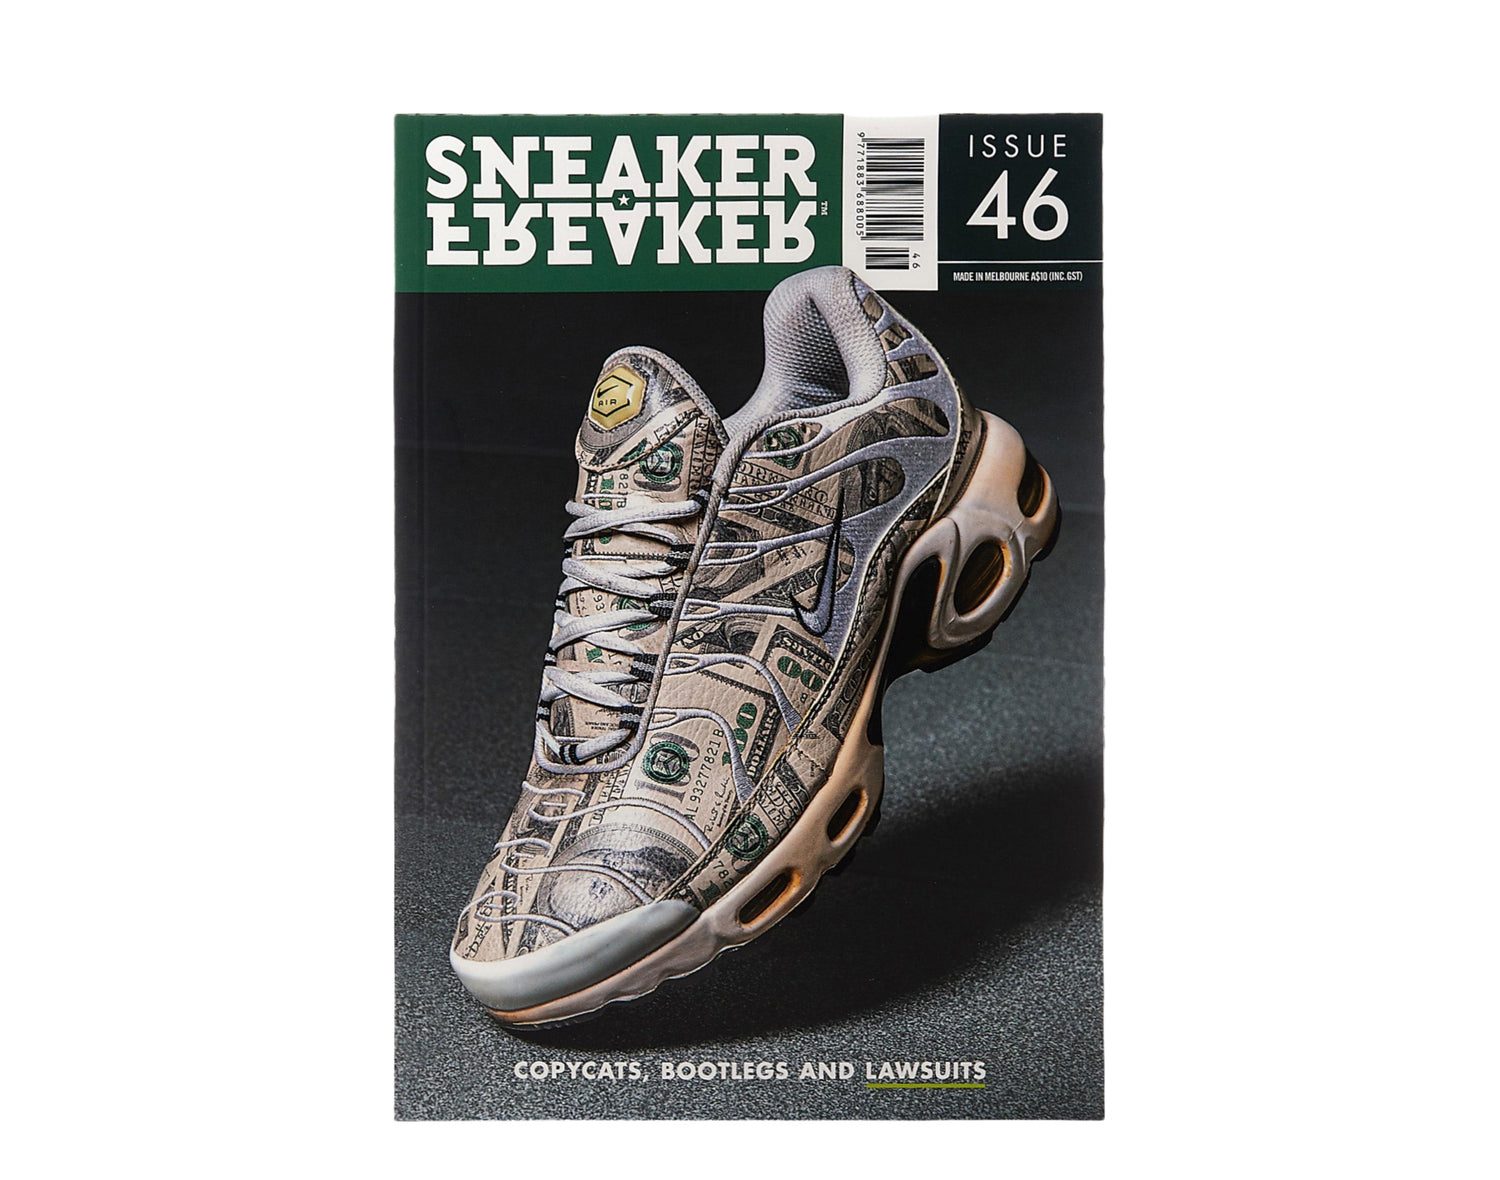 Sneaker Freaker Magazine Issue # 46 - Air Max Plus Copycats, Bootlegs and Lawsuits Cover